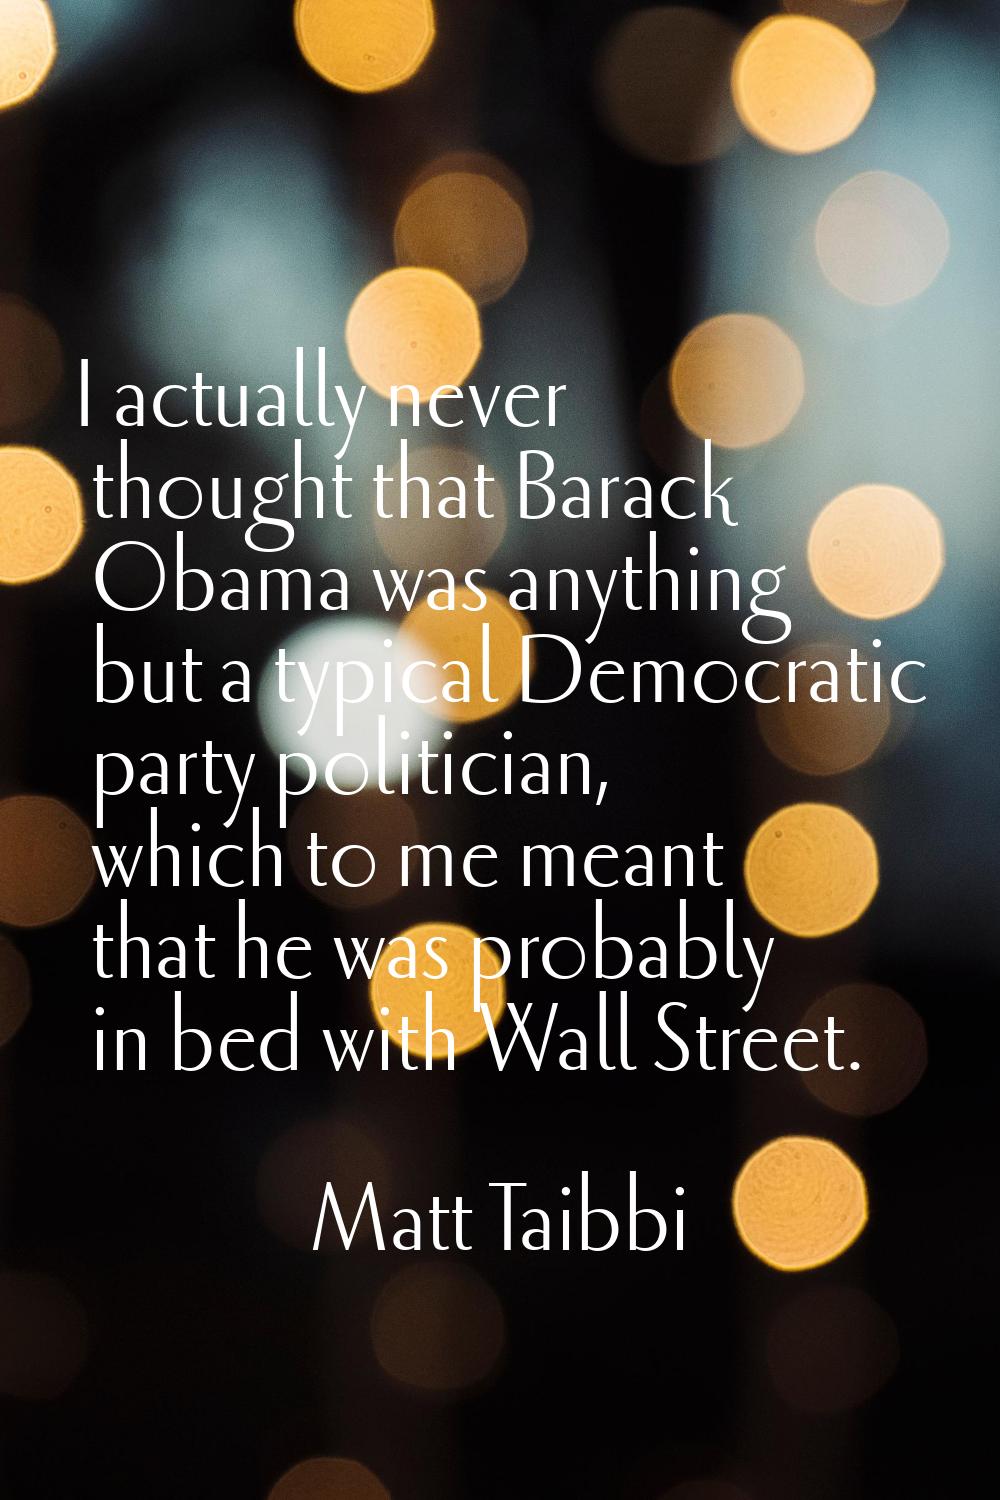 I actually never thought that Barack Obama was anything but a typical Democratic party politician, 